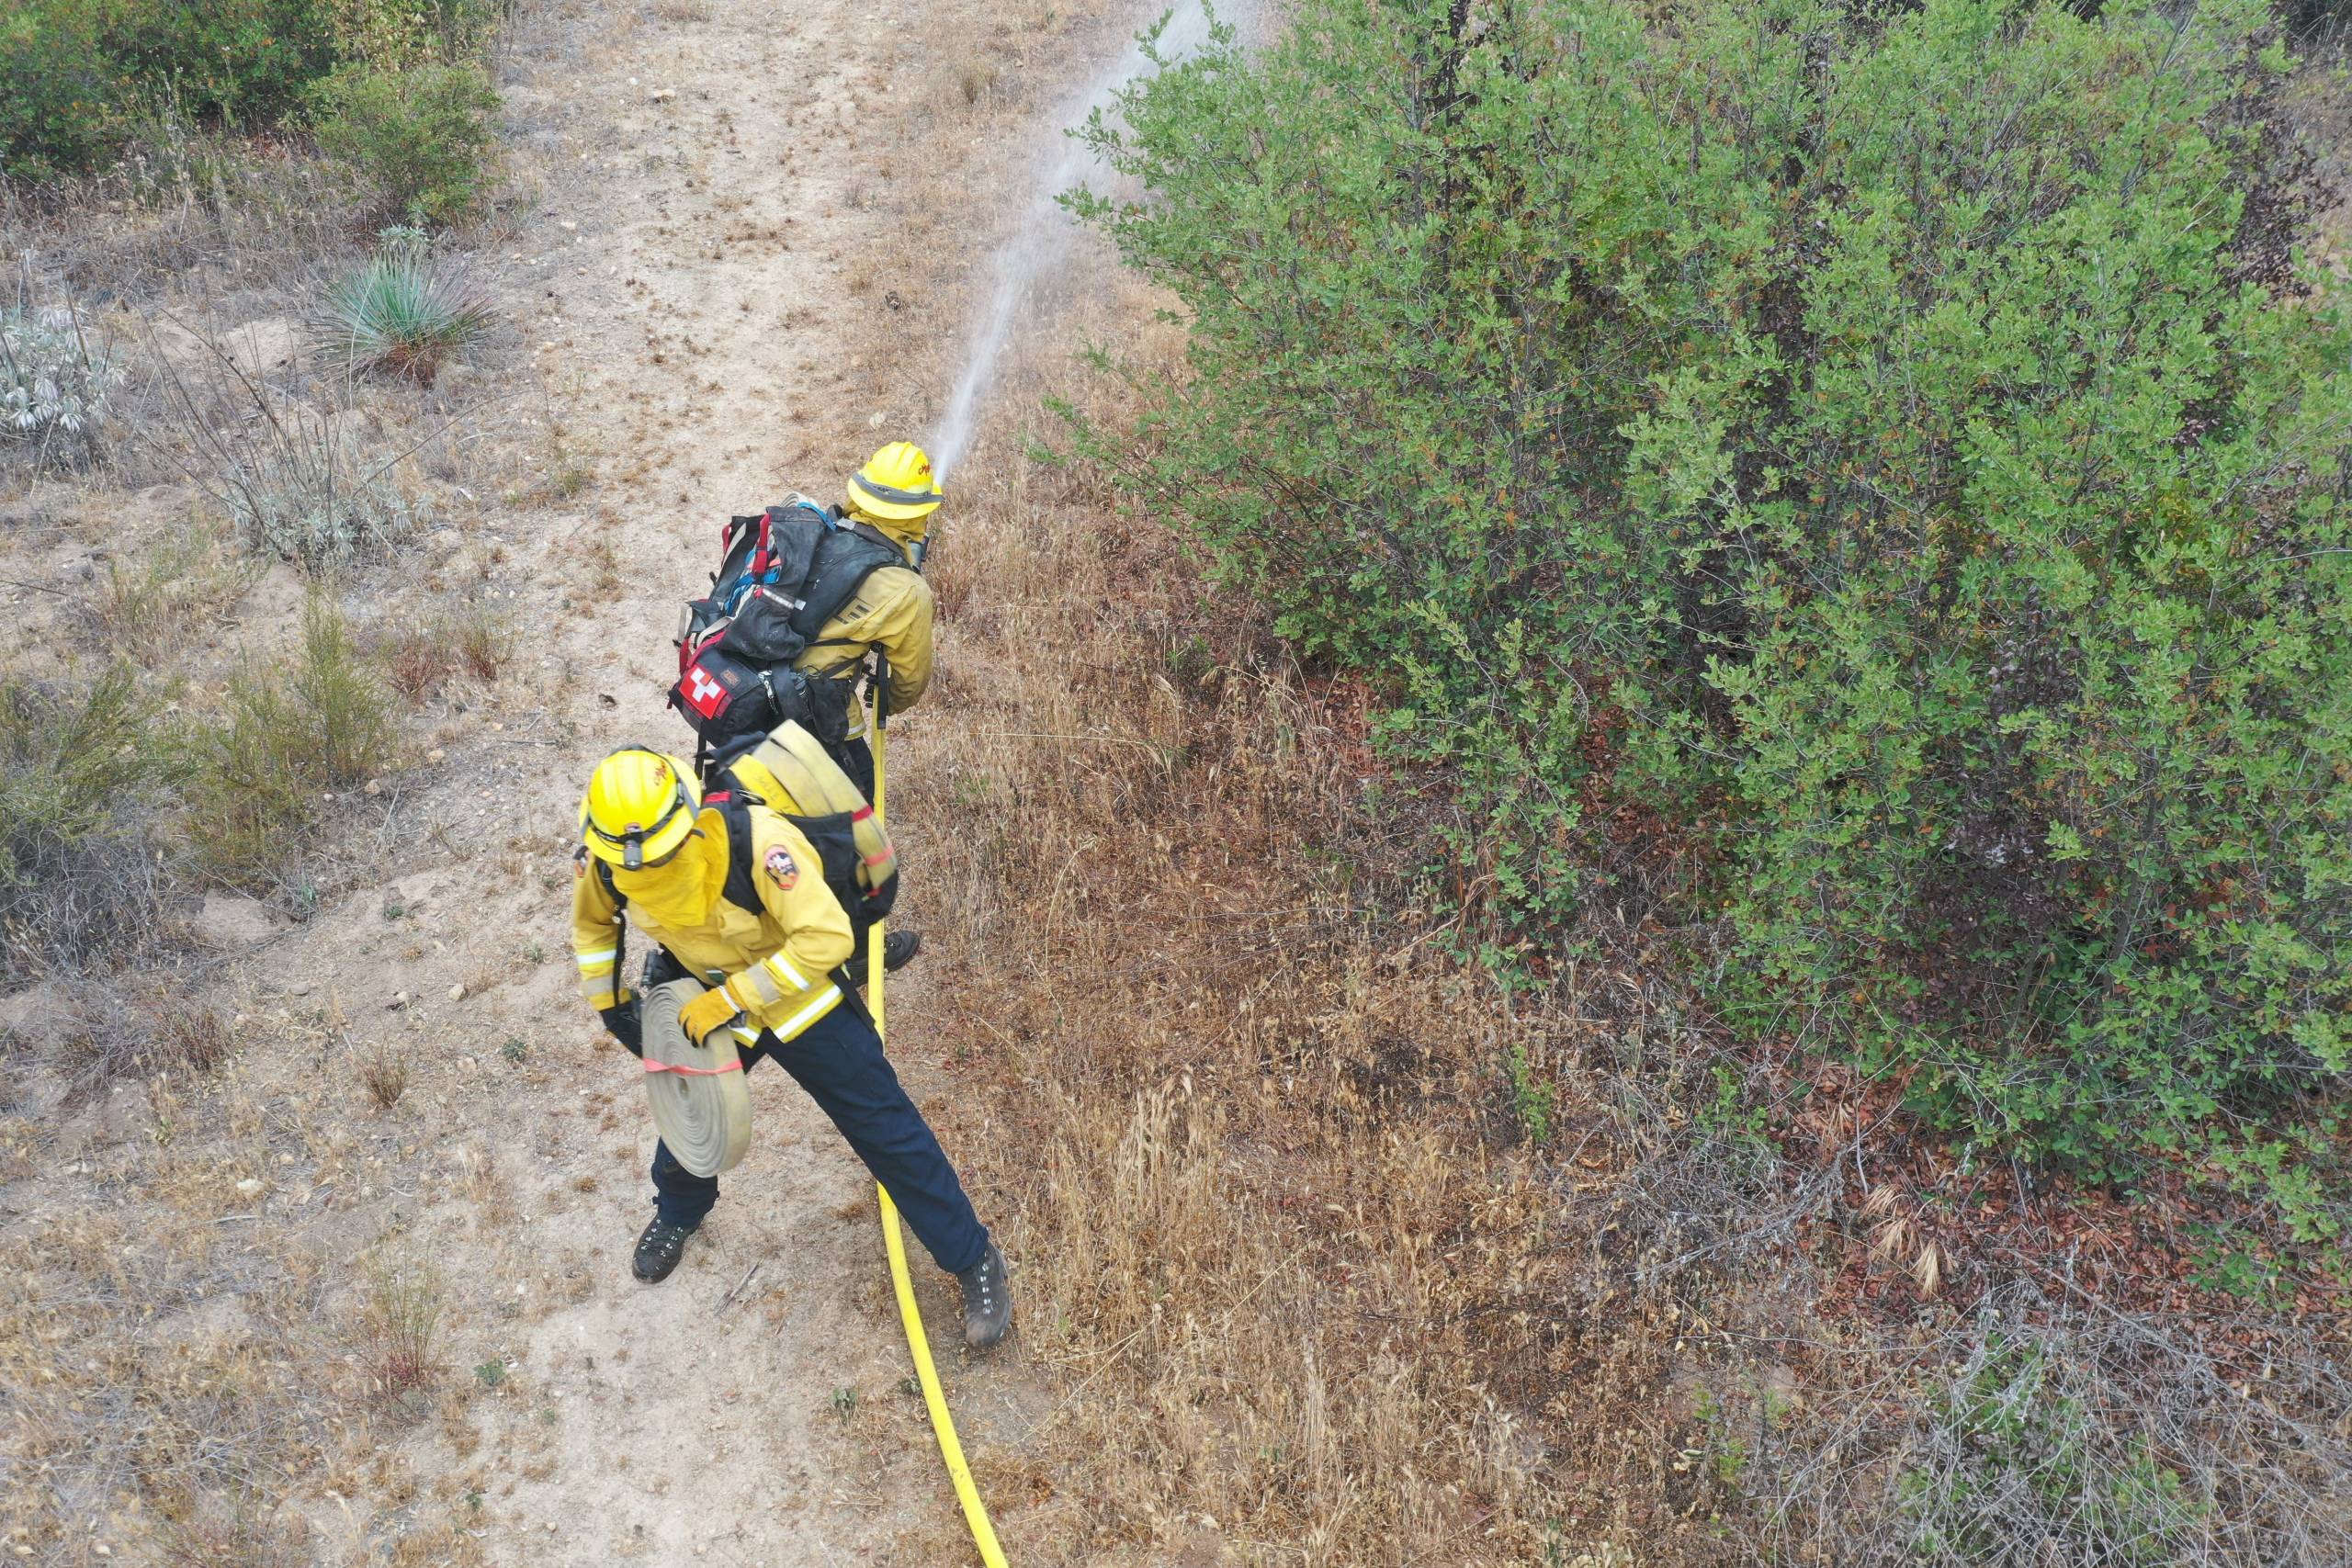 Two firefighters seem to be pulling a long hose through the forest.